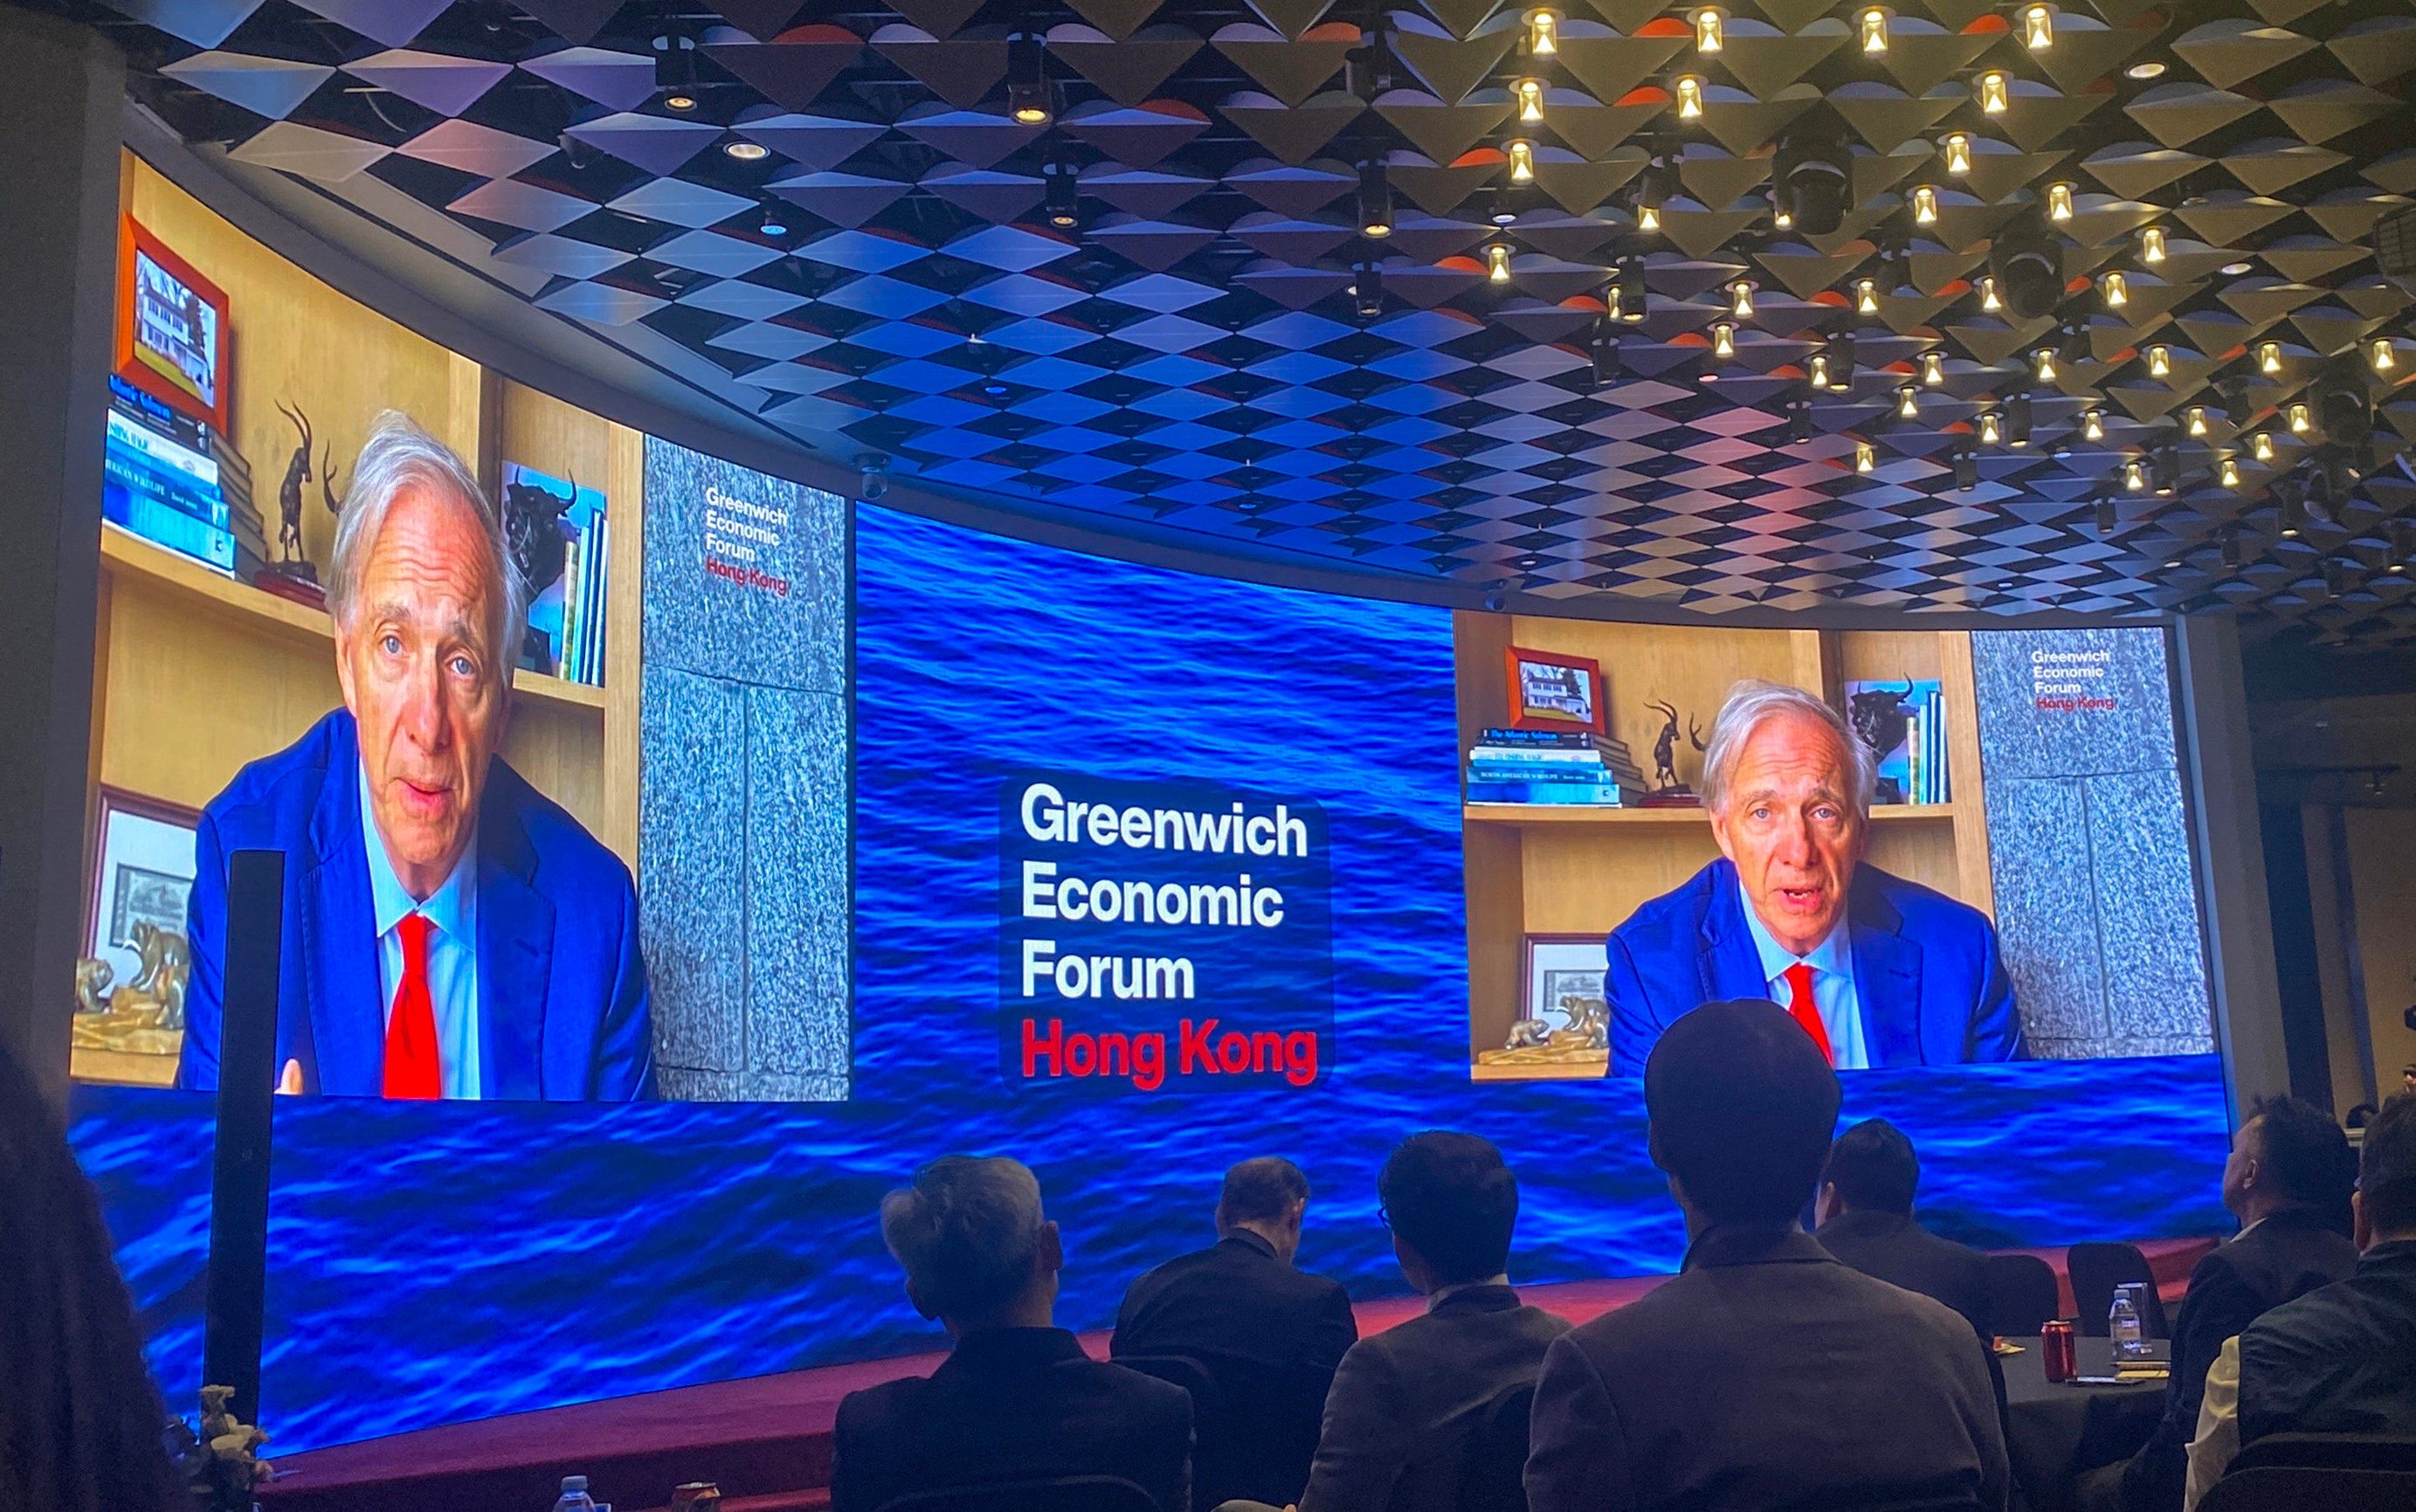 ‘Diversification and investment in China is desirable,’ Dalio said in a virtual presentation at the Greenwich Economic Forum in Hong Kong. Photo: Jiaxing Li